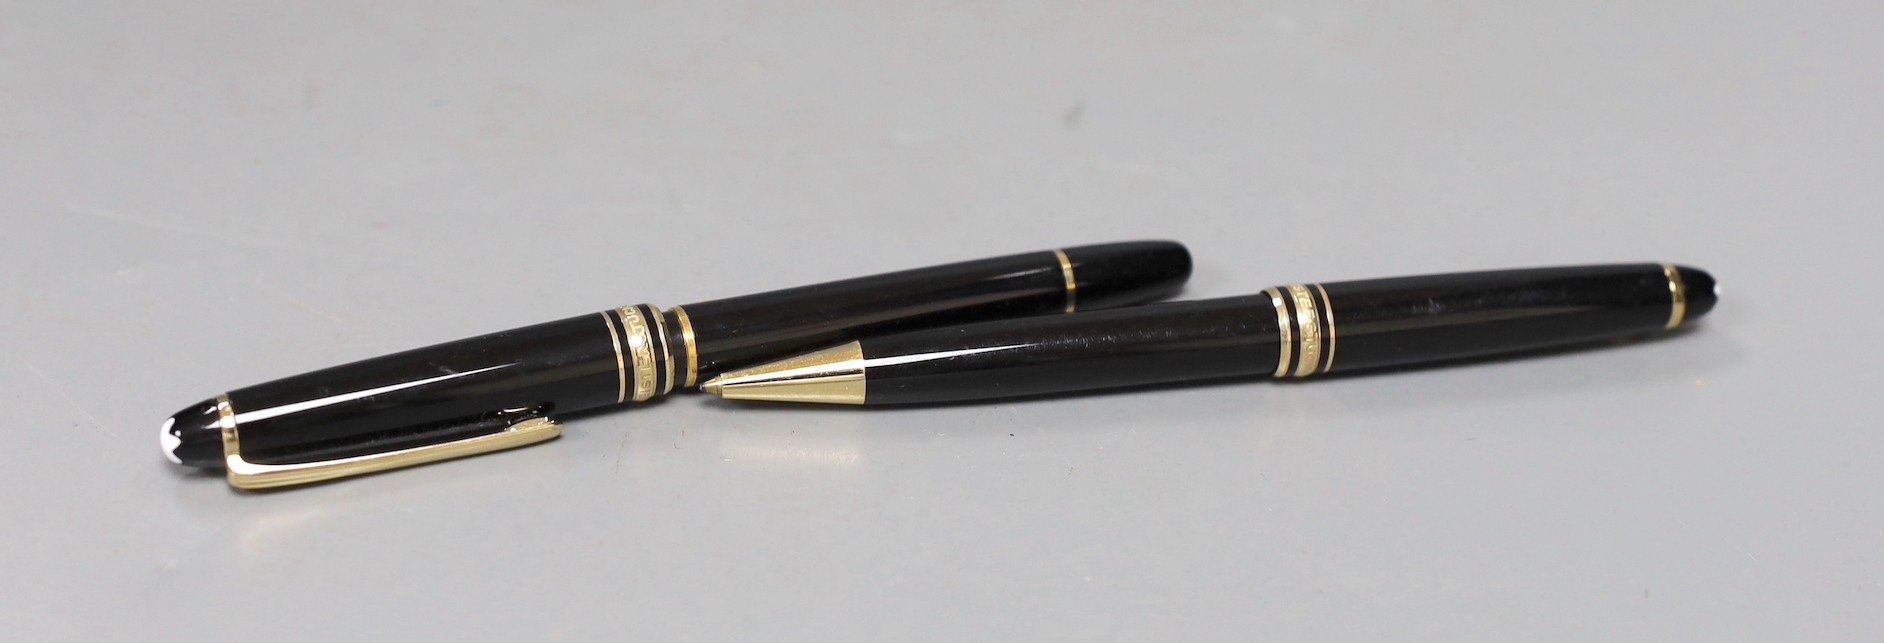 A Montblanc fountain pen and a matching ballpoint pen